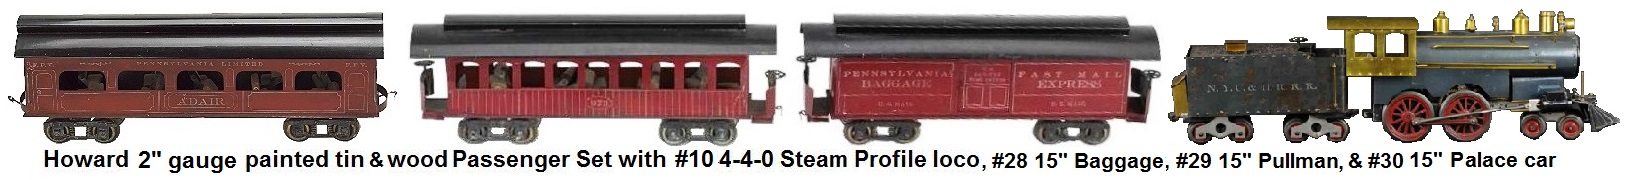 Howard #10 4-4-0 steam profile loco with #28 baggage car, #29 Pullman Chair passenger coach and #30 Pullman Palace sleeper car in 2 inch gauge bearing the Pennsylvania Lines livery